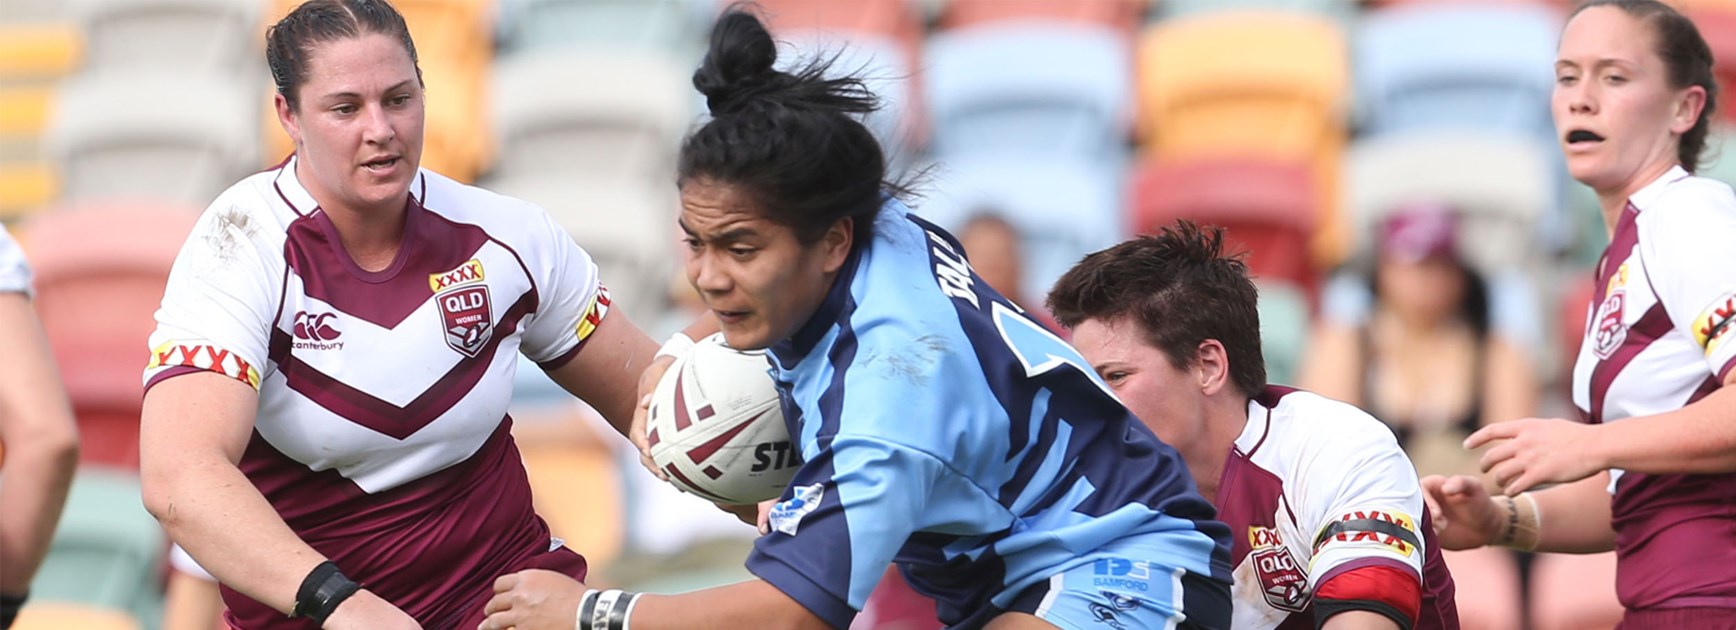 Simaima Tau takes a charge for the women's NSW team against Queensland on Saturday.